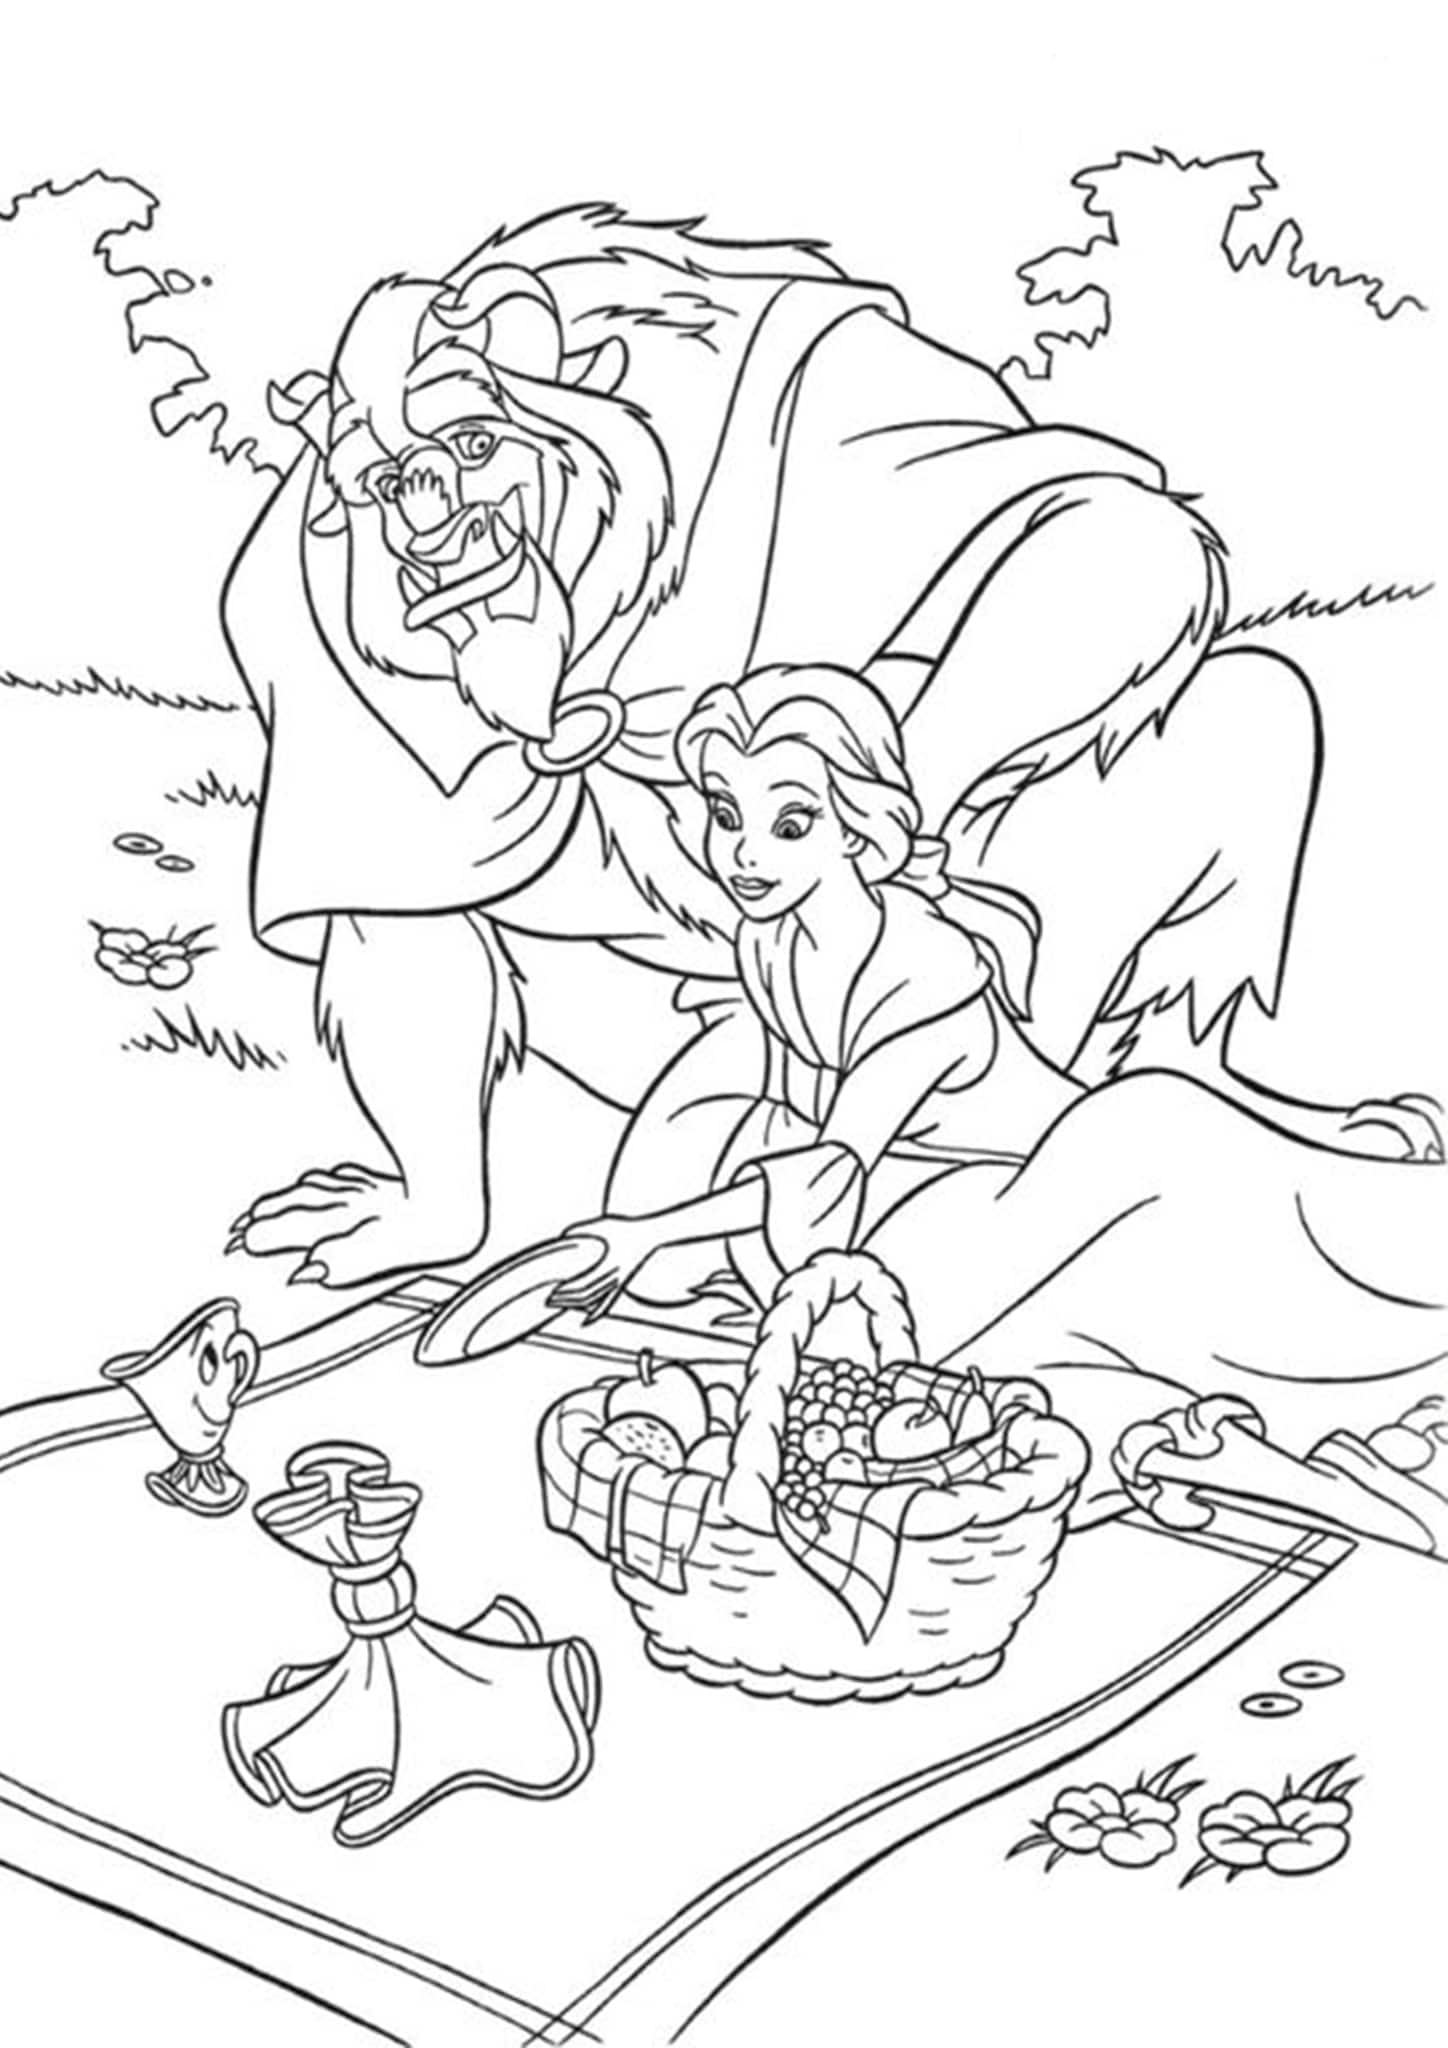 Cartoon Beauty And The Beast Free Coloring Pages for Kids